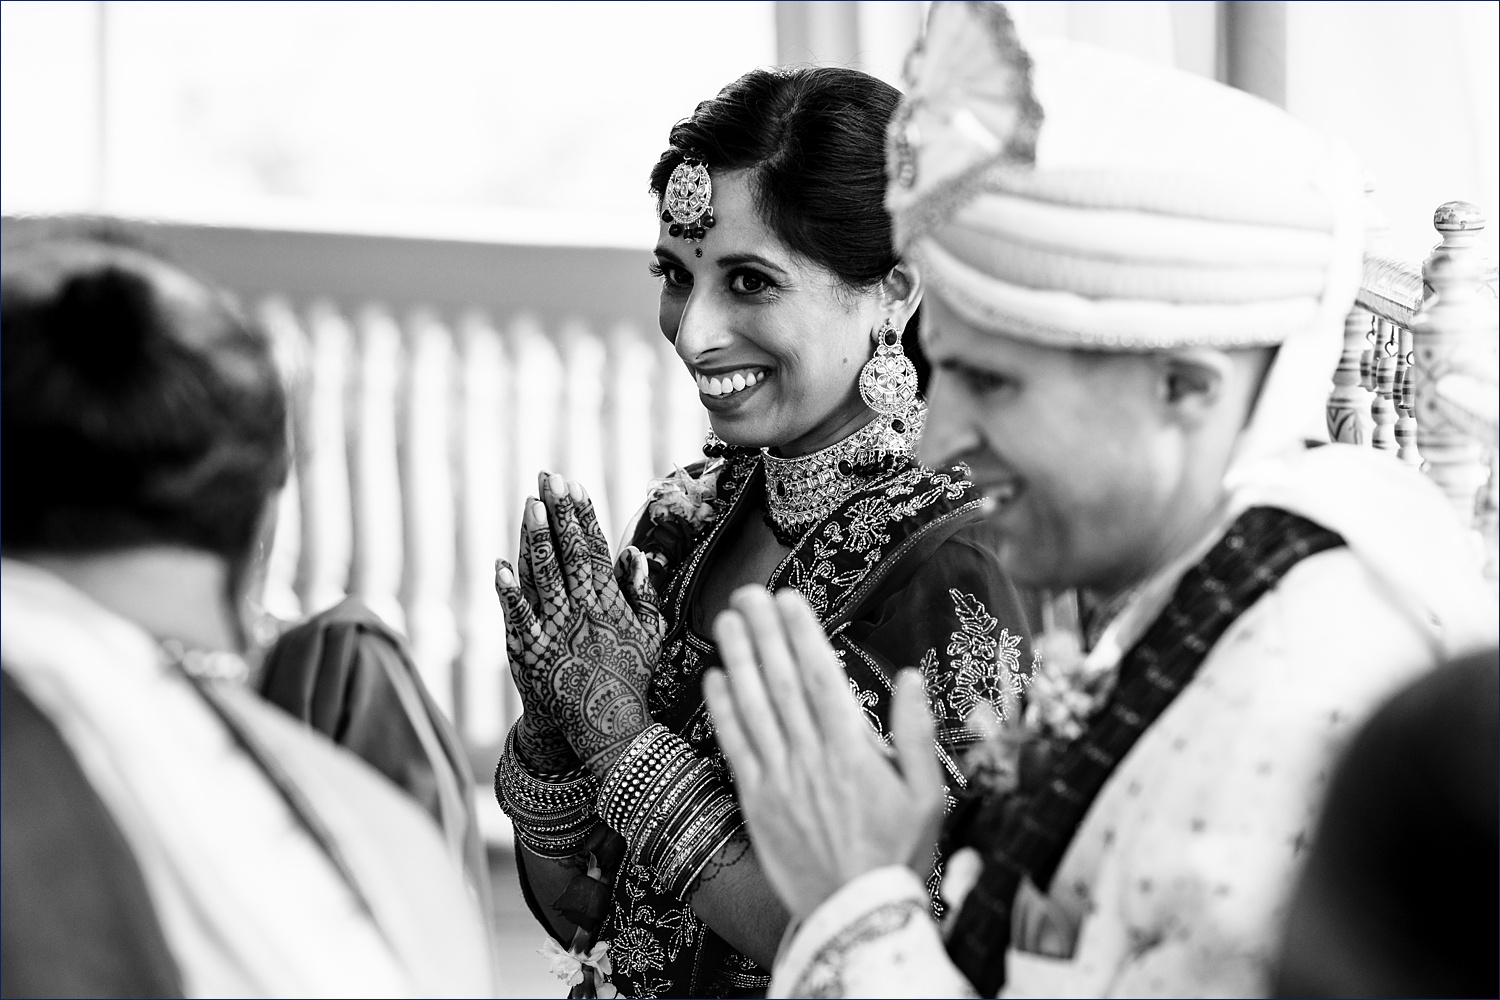 The bride smiles at the Hindu priest during the wedding ceremony